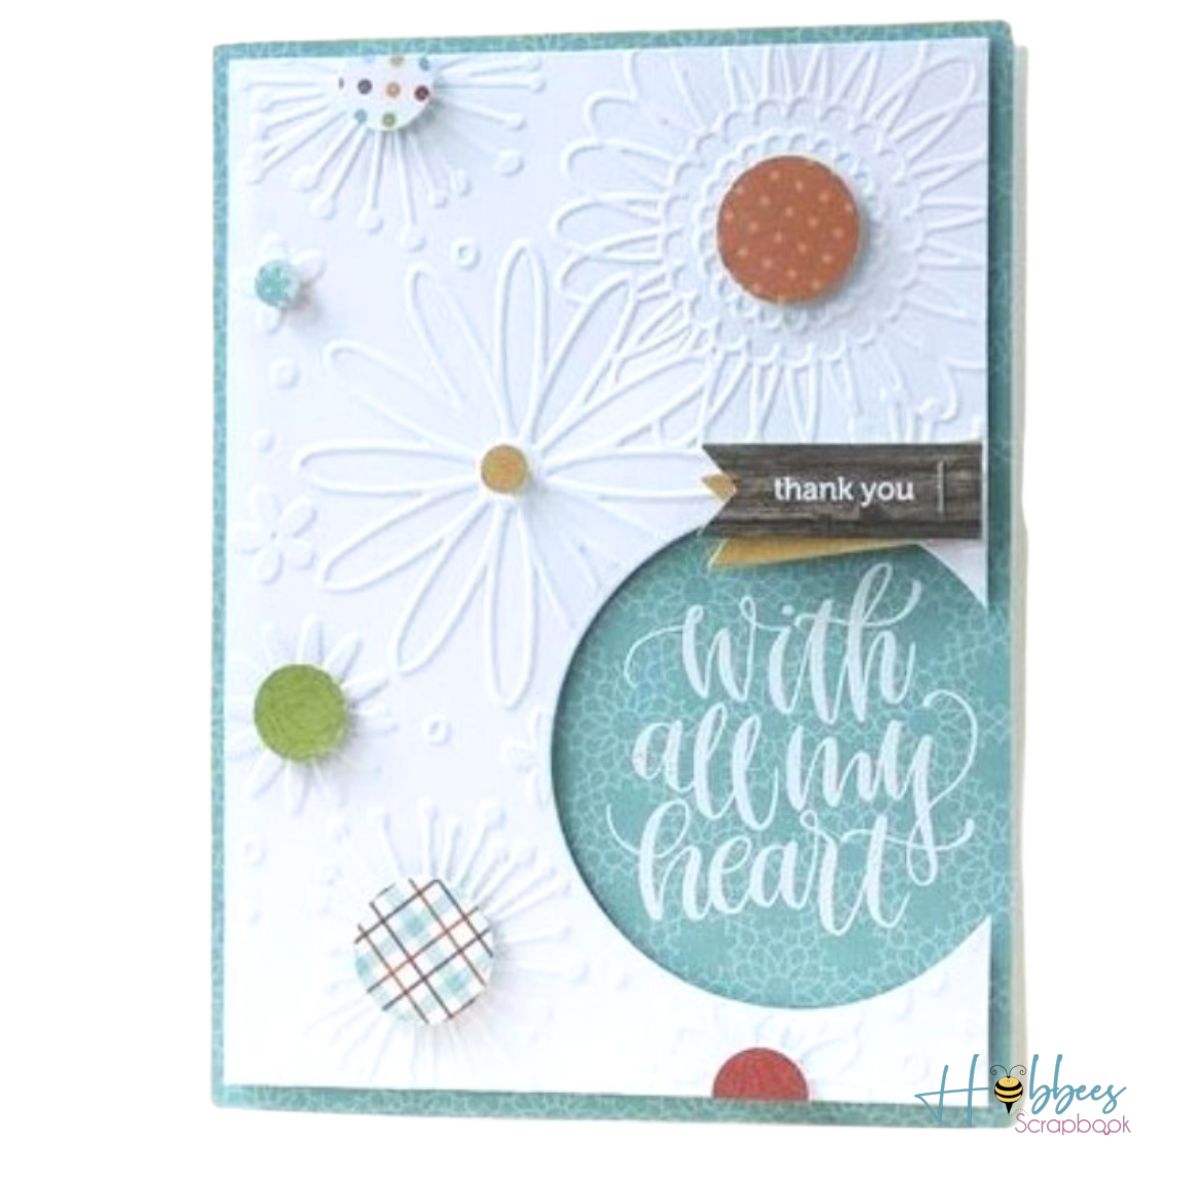 Embossing Folders: A How-To for Scrapbooking & Card Making 